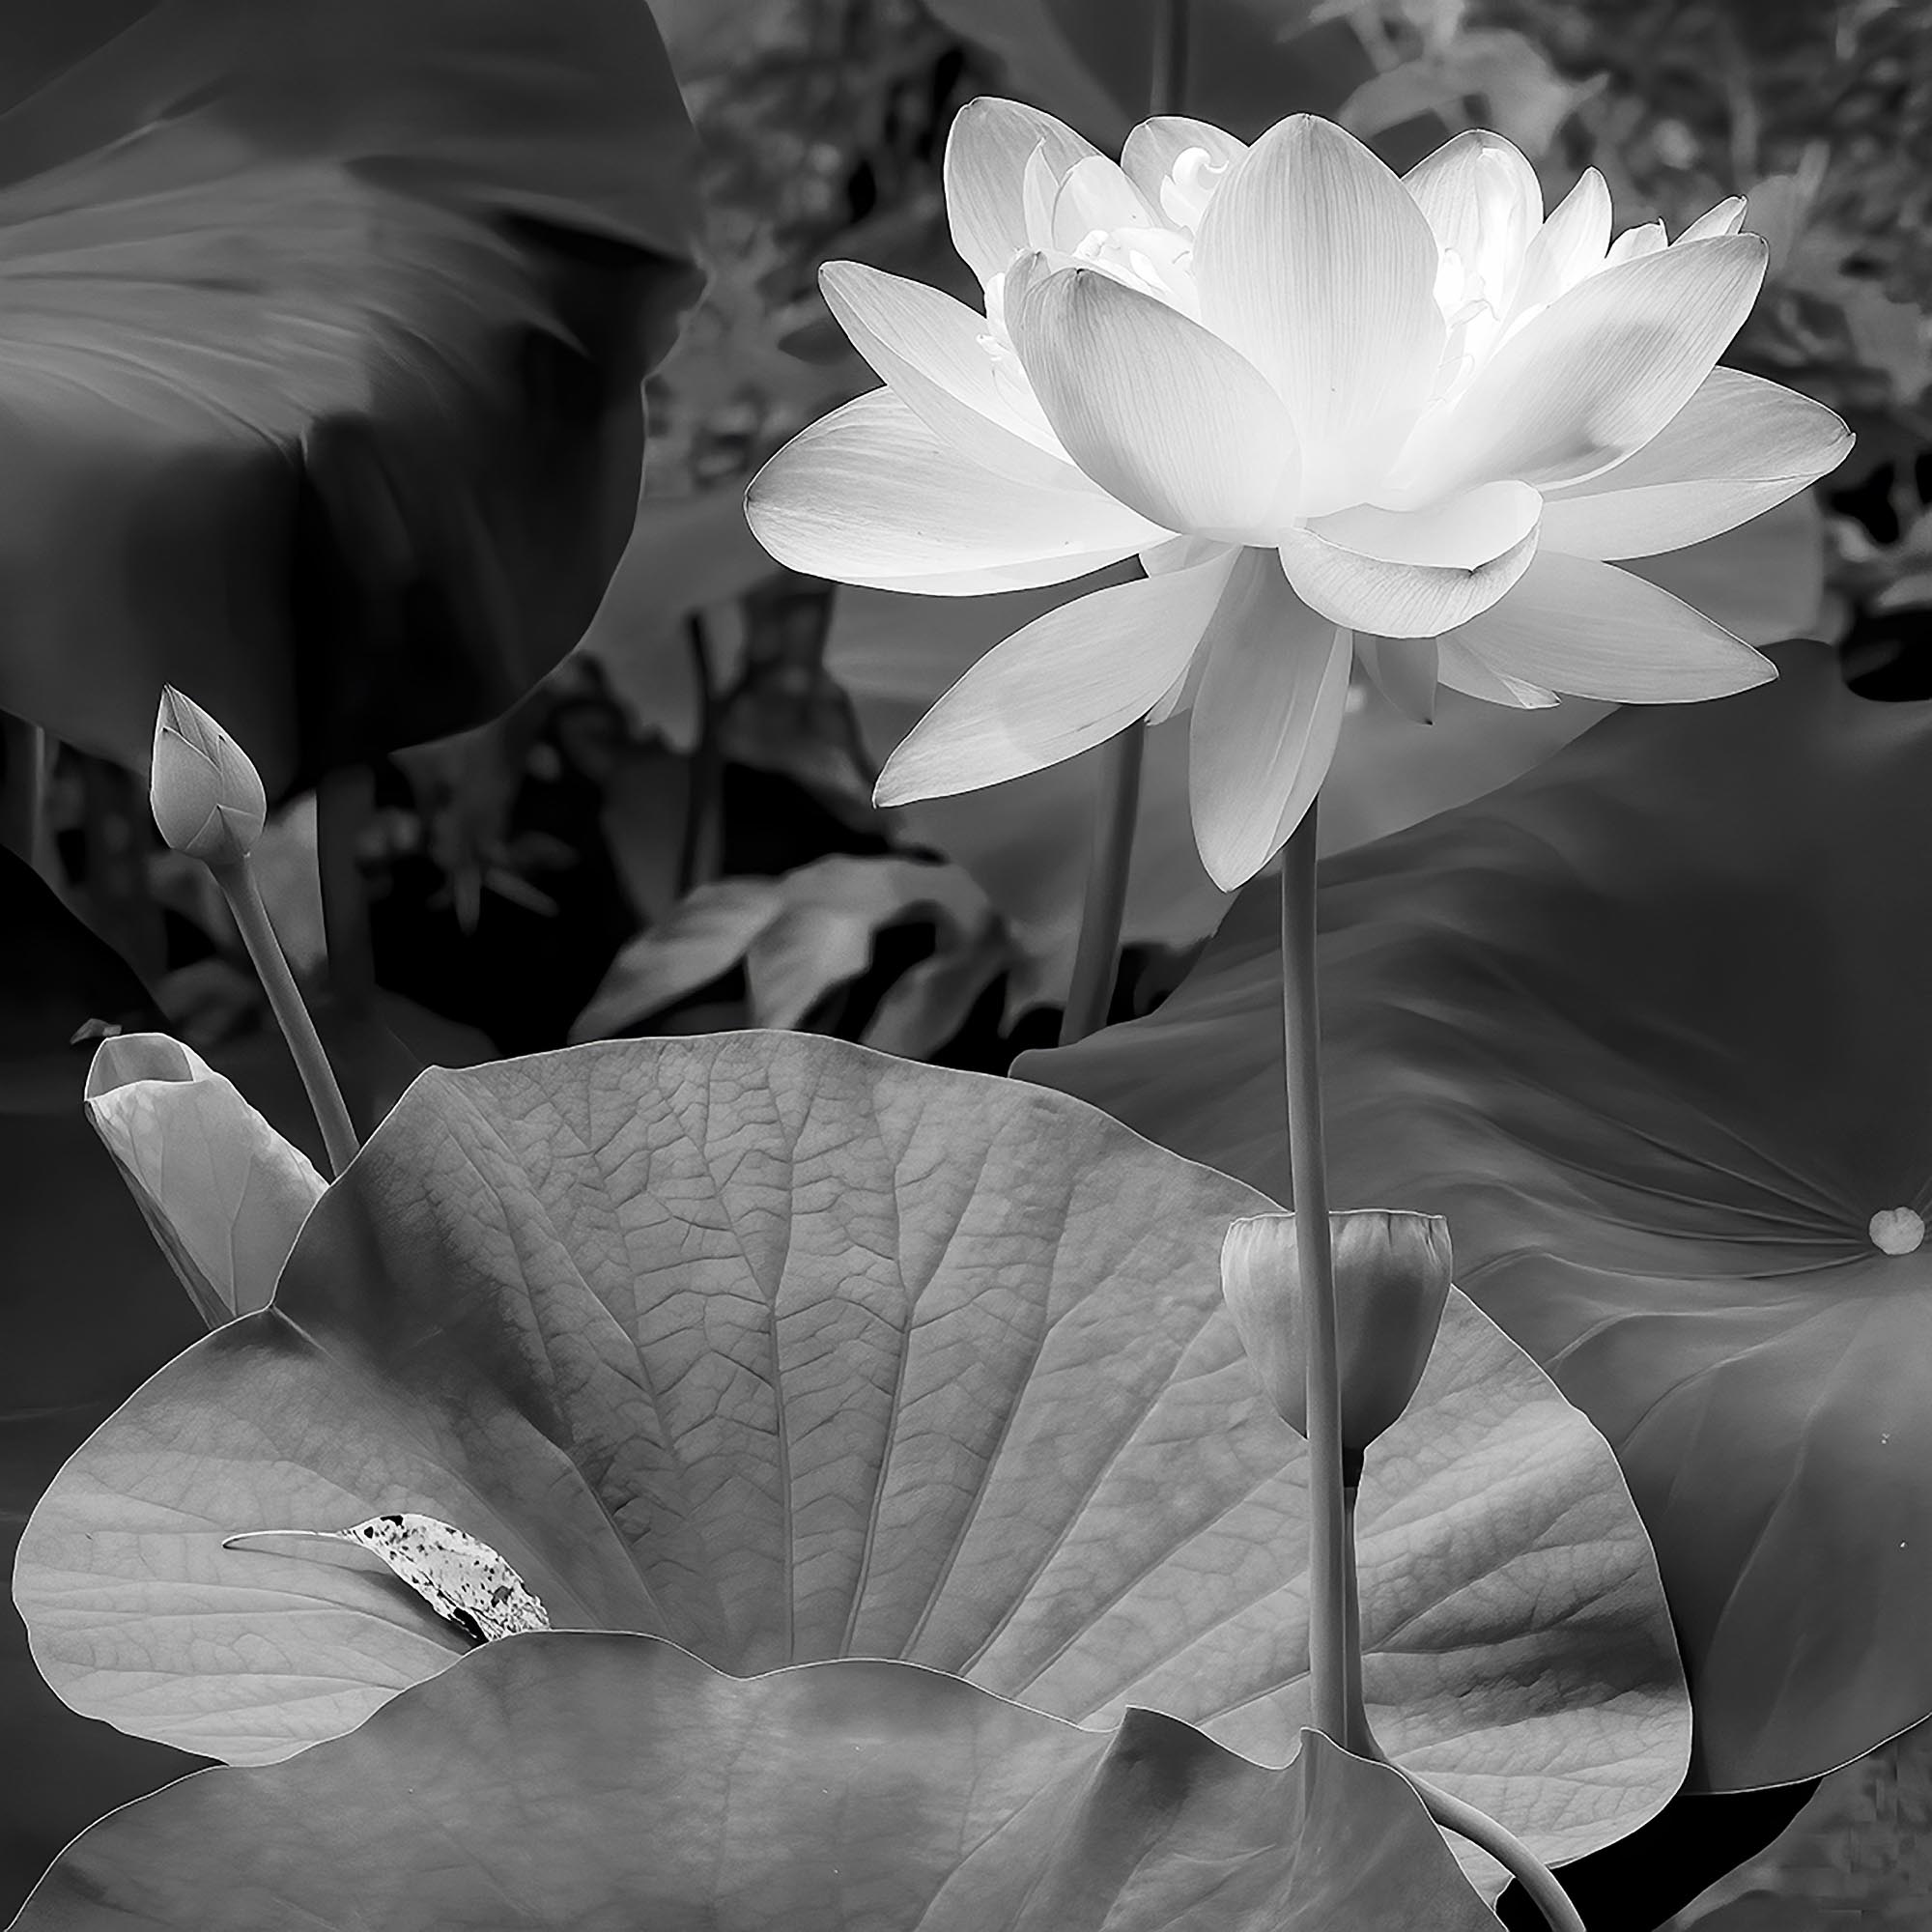 Landscape of Lotus in black and white